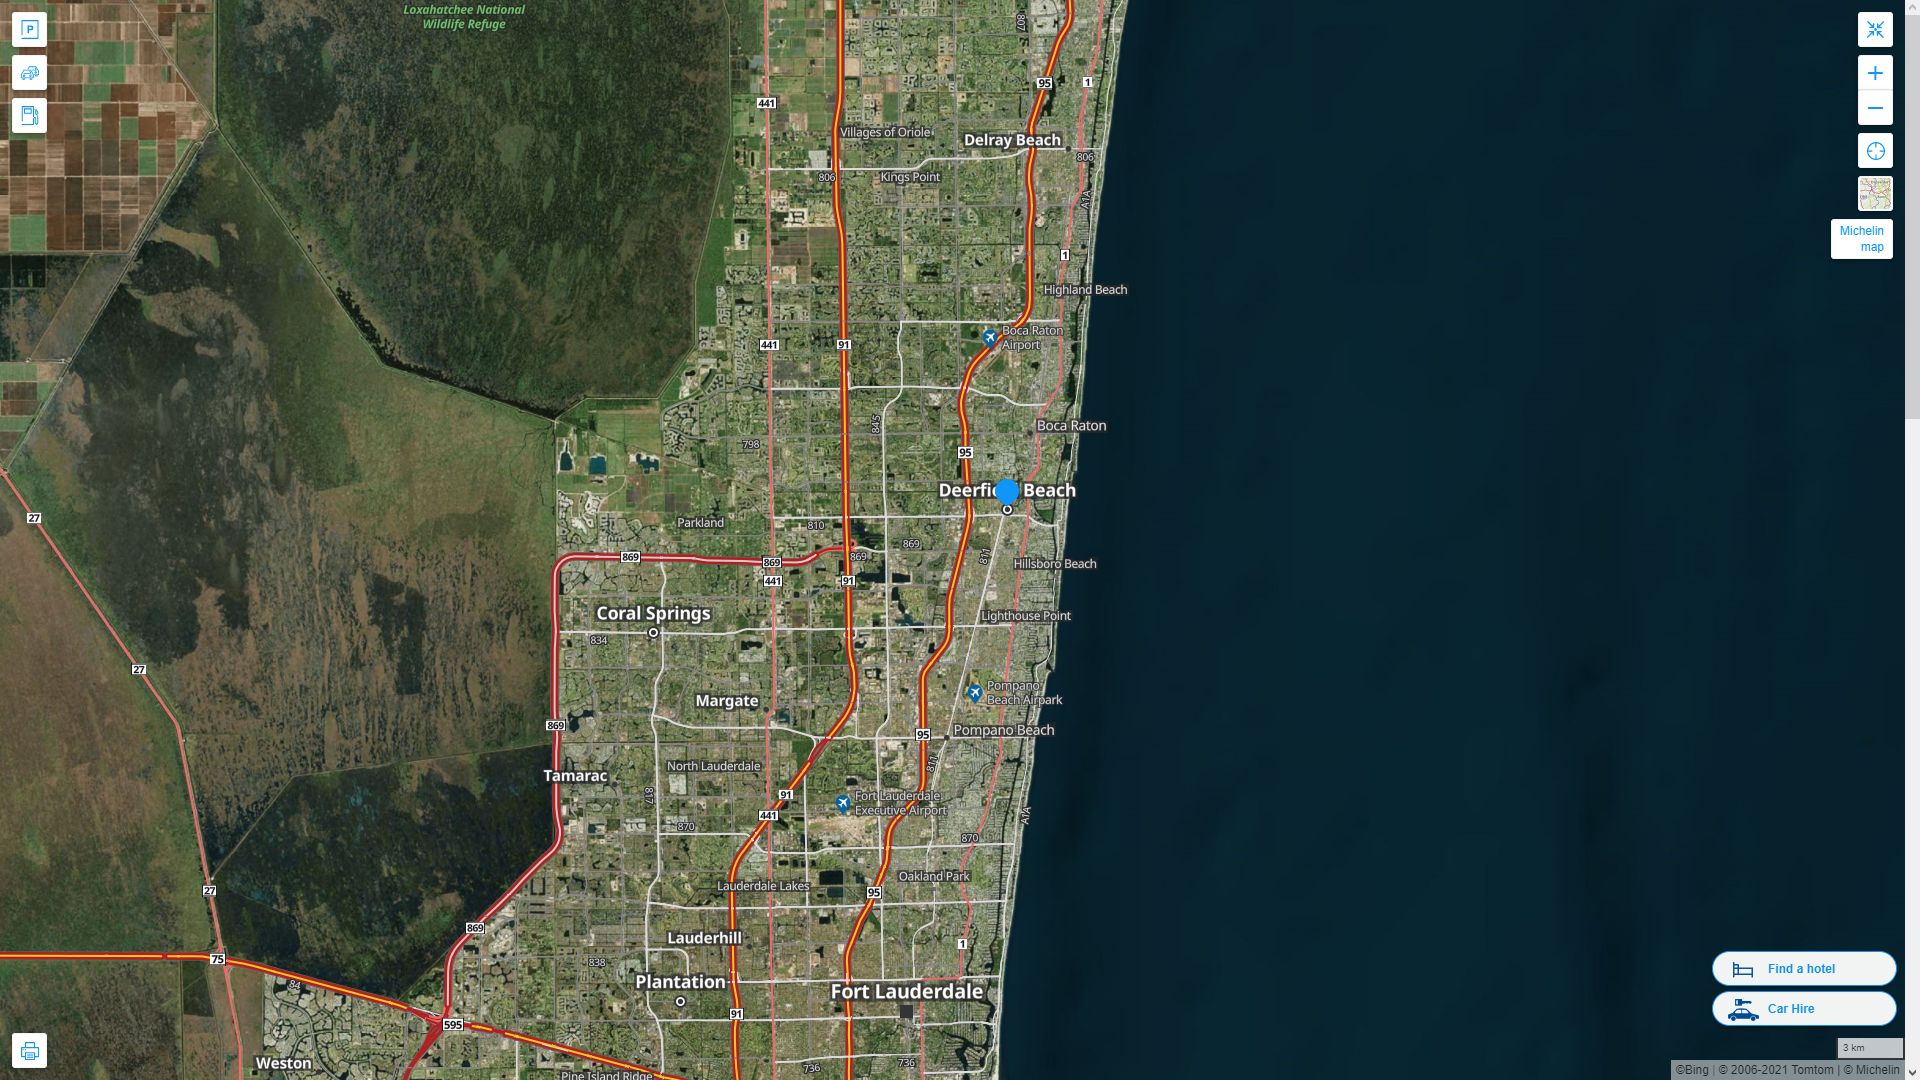 Deerfield Beach Florida Highway and Road Map with Satellite View